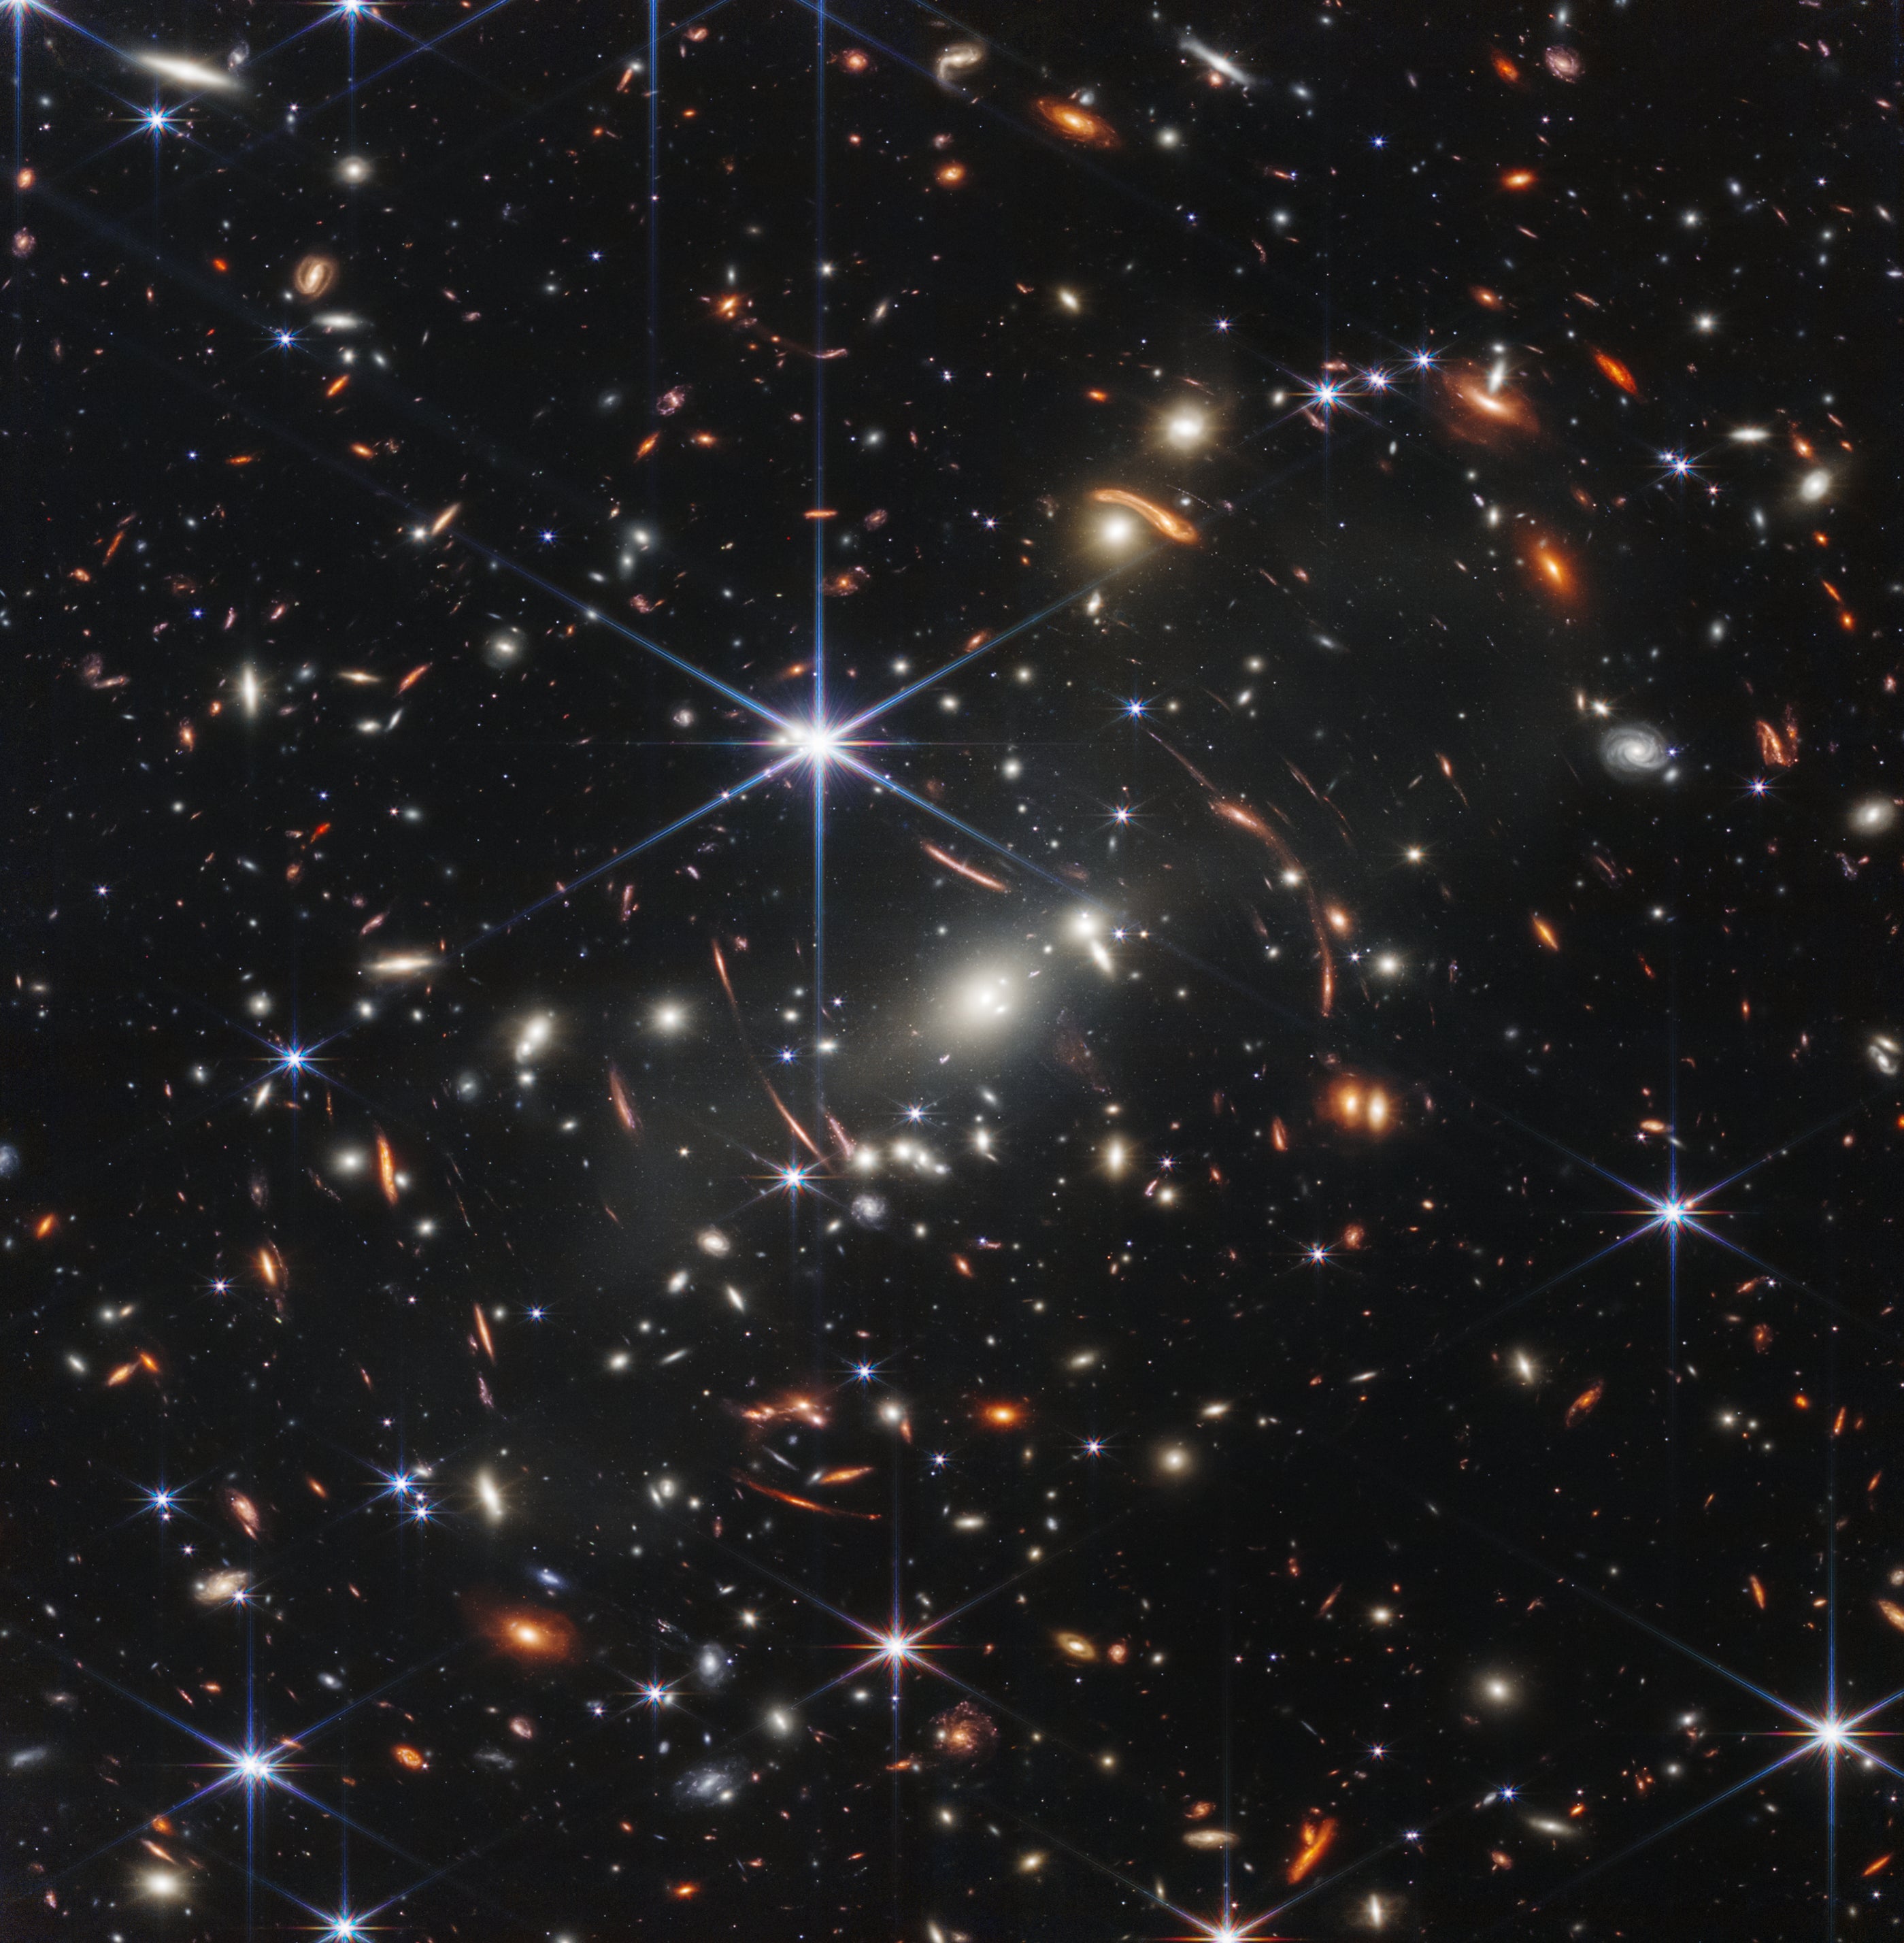 This is the first publicly released scientific image from the Webb telescope, showing a deep-field look at the sky that includes many distant galaxies.